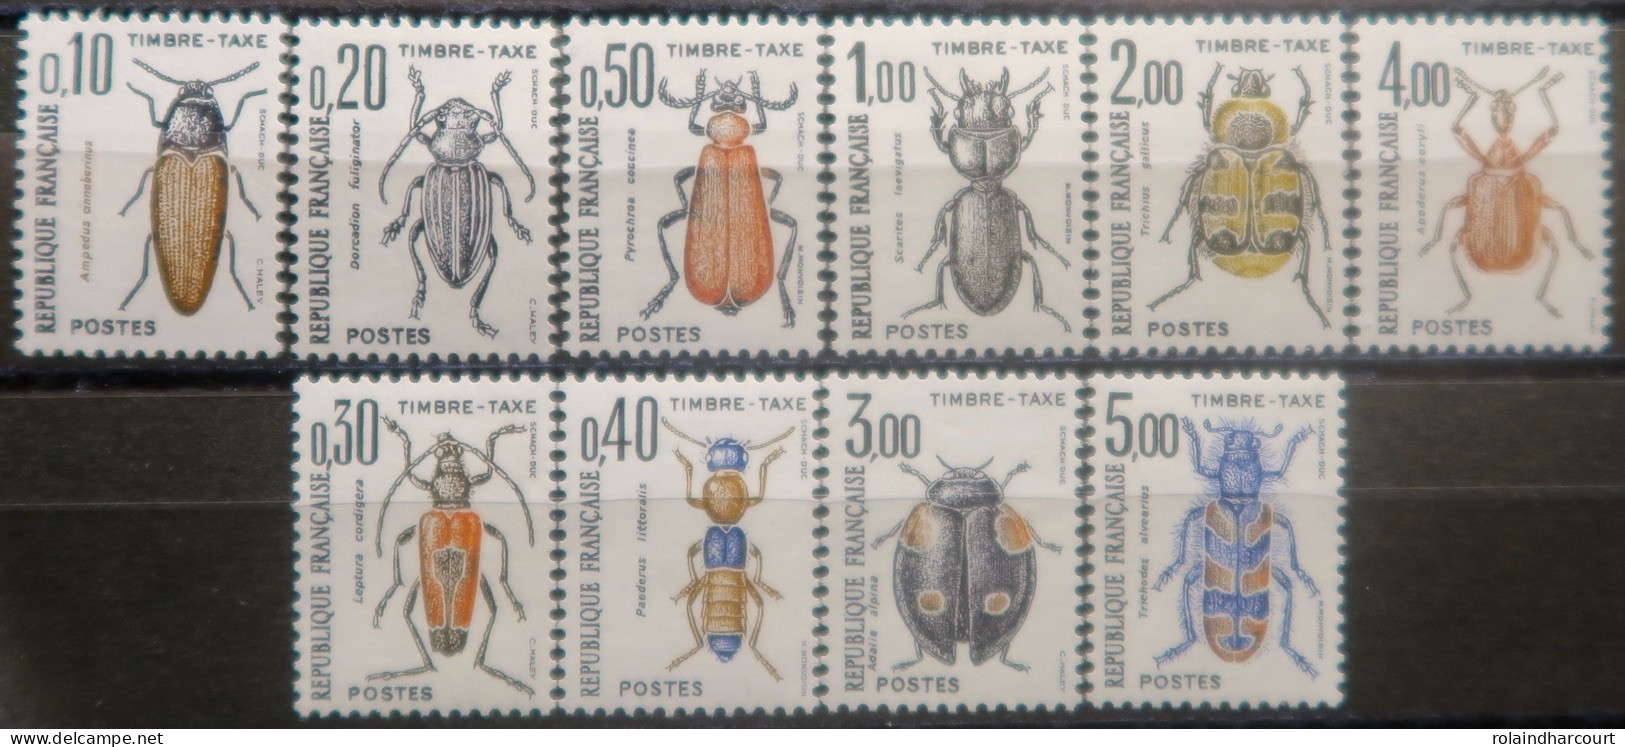 LP3969/379 - 1982/1993 - TIMBRES TAXE - INSECTES - SERIE COMPLETE - N°103 à 112 NEUFS** - 1960-.... Mint/hinged